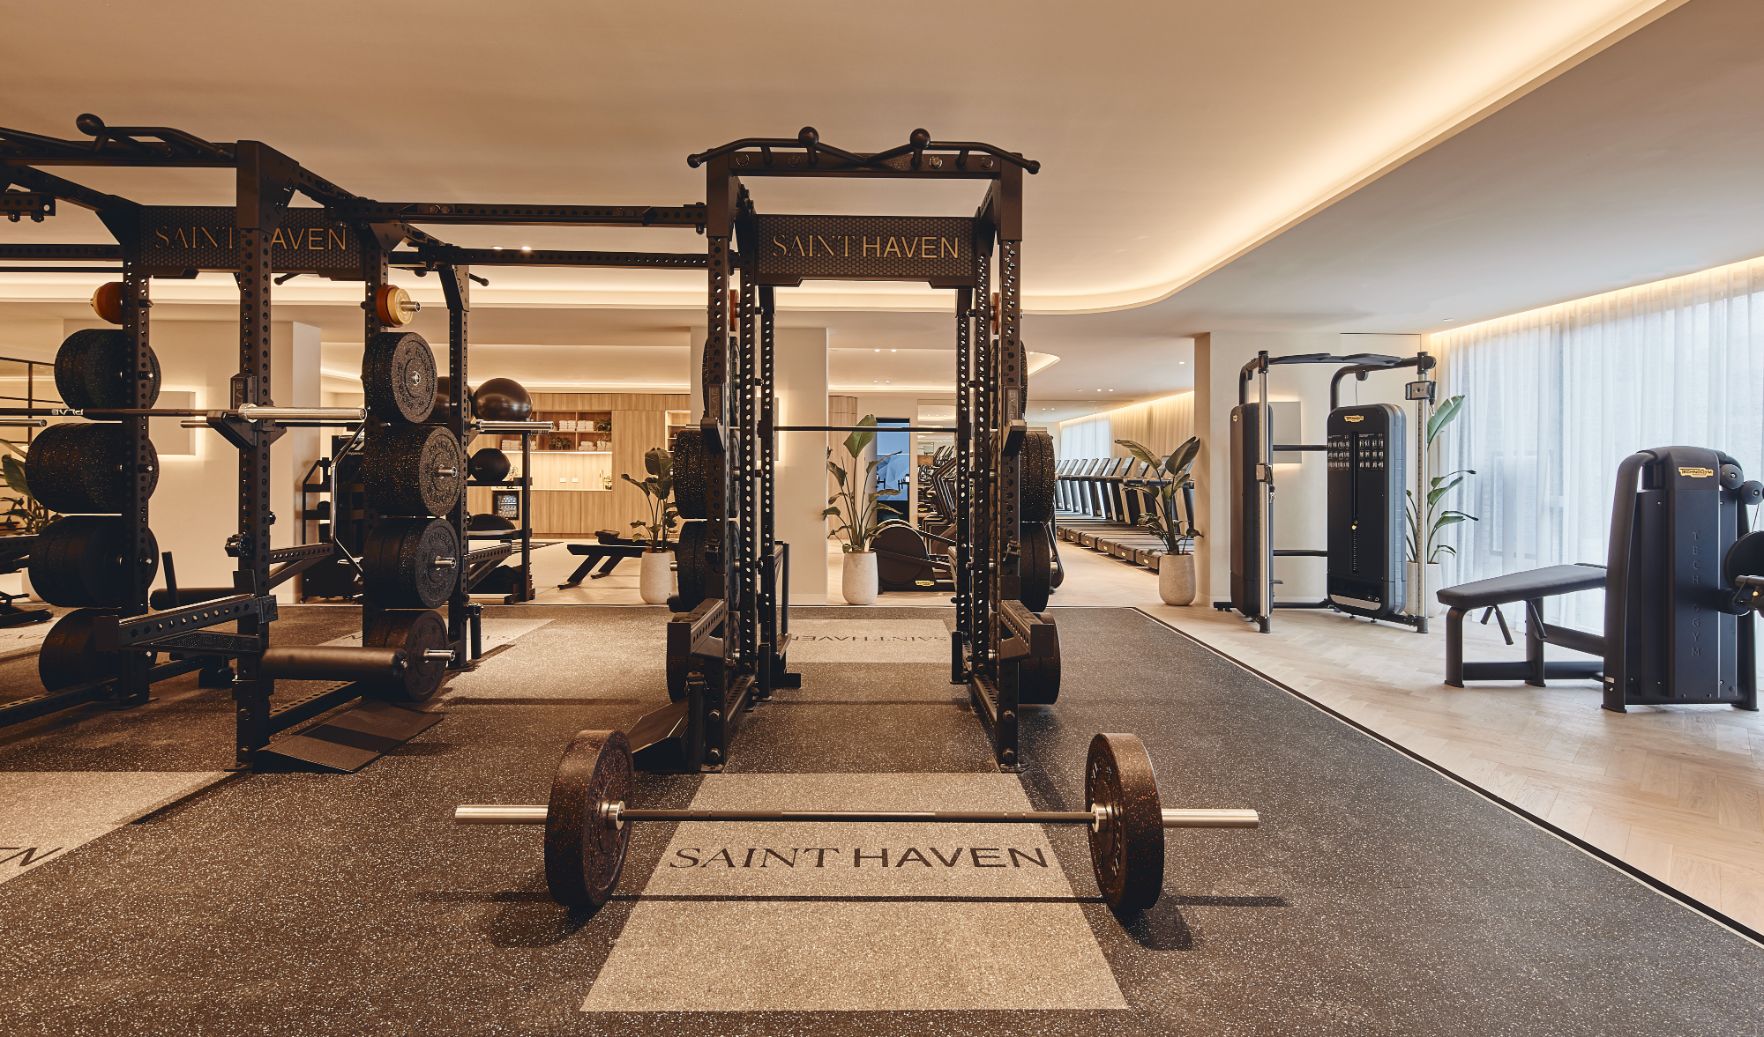 $150 Million Melbourne Member’s Only Wellness Club Saint Haven Opens Its Doors Tomorrow